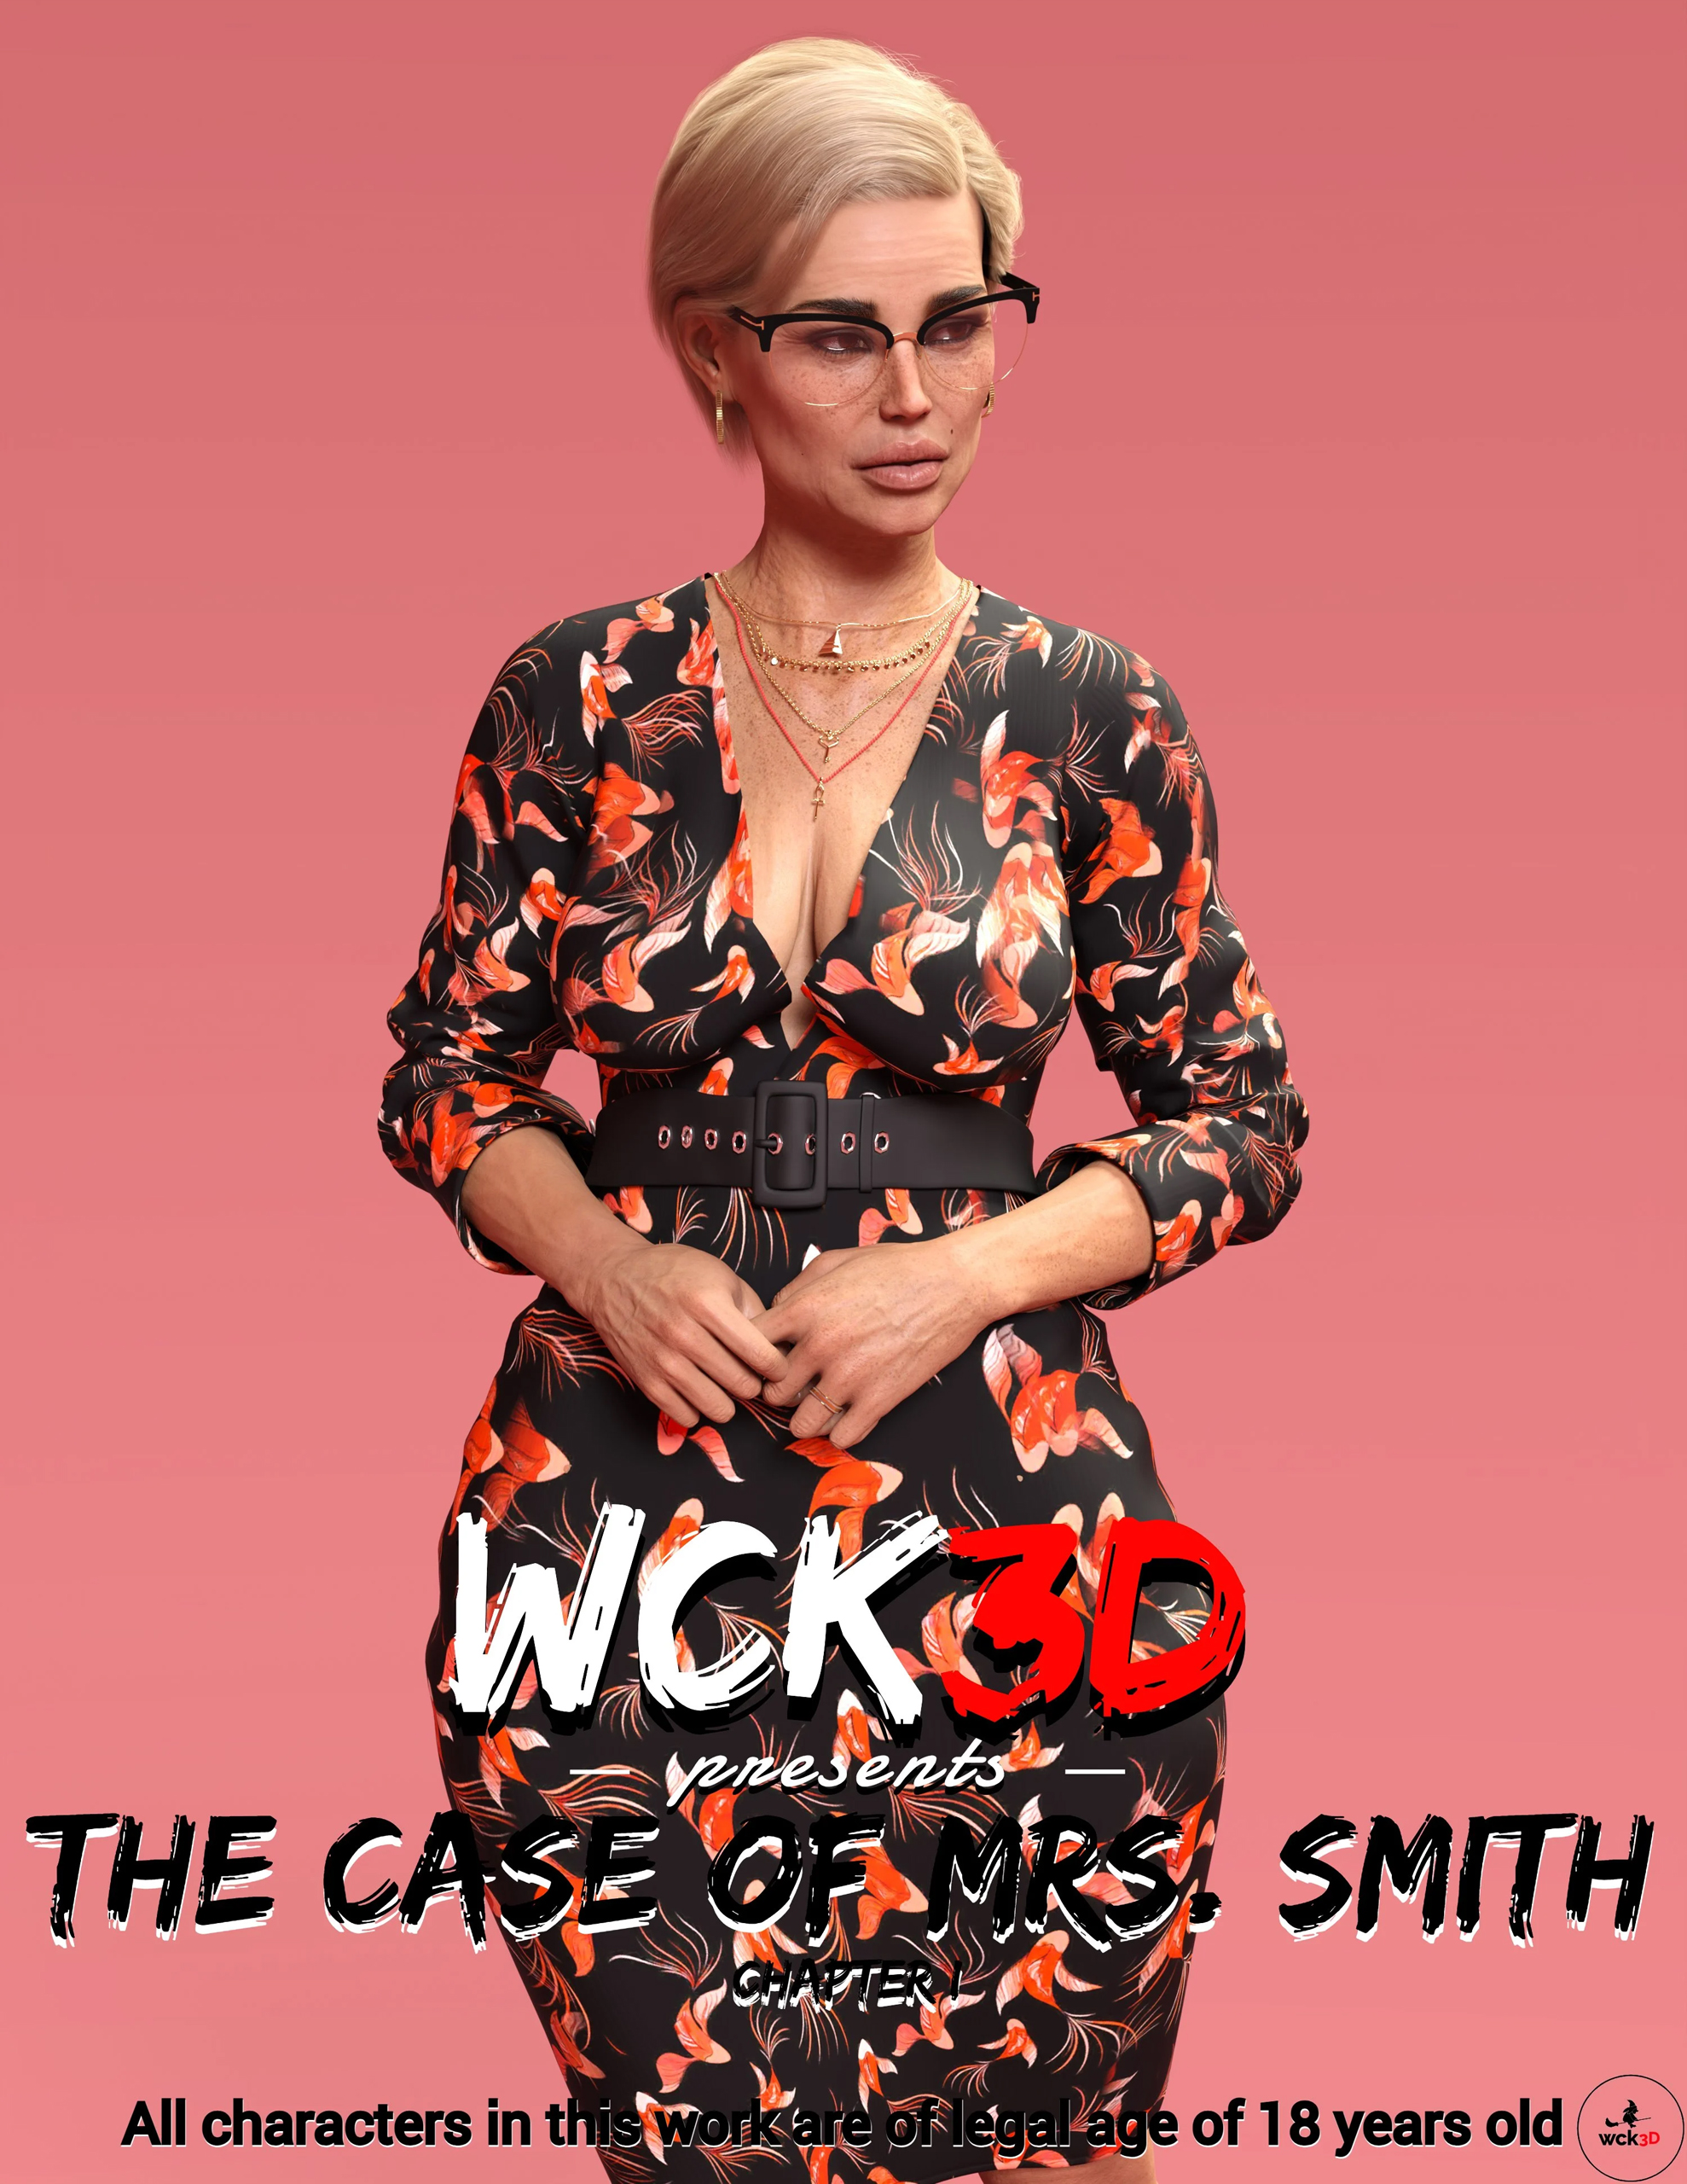 The Case of Mrs. Smith [Wck3D]